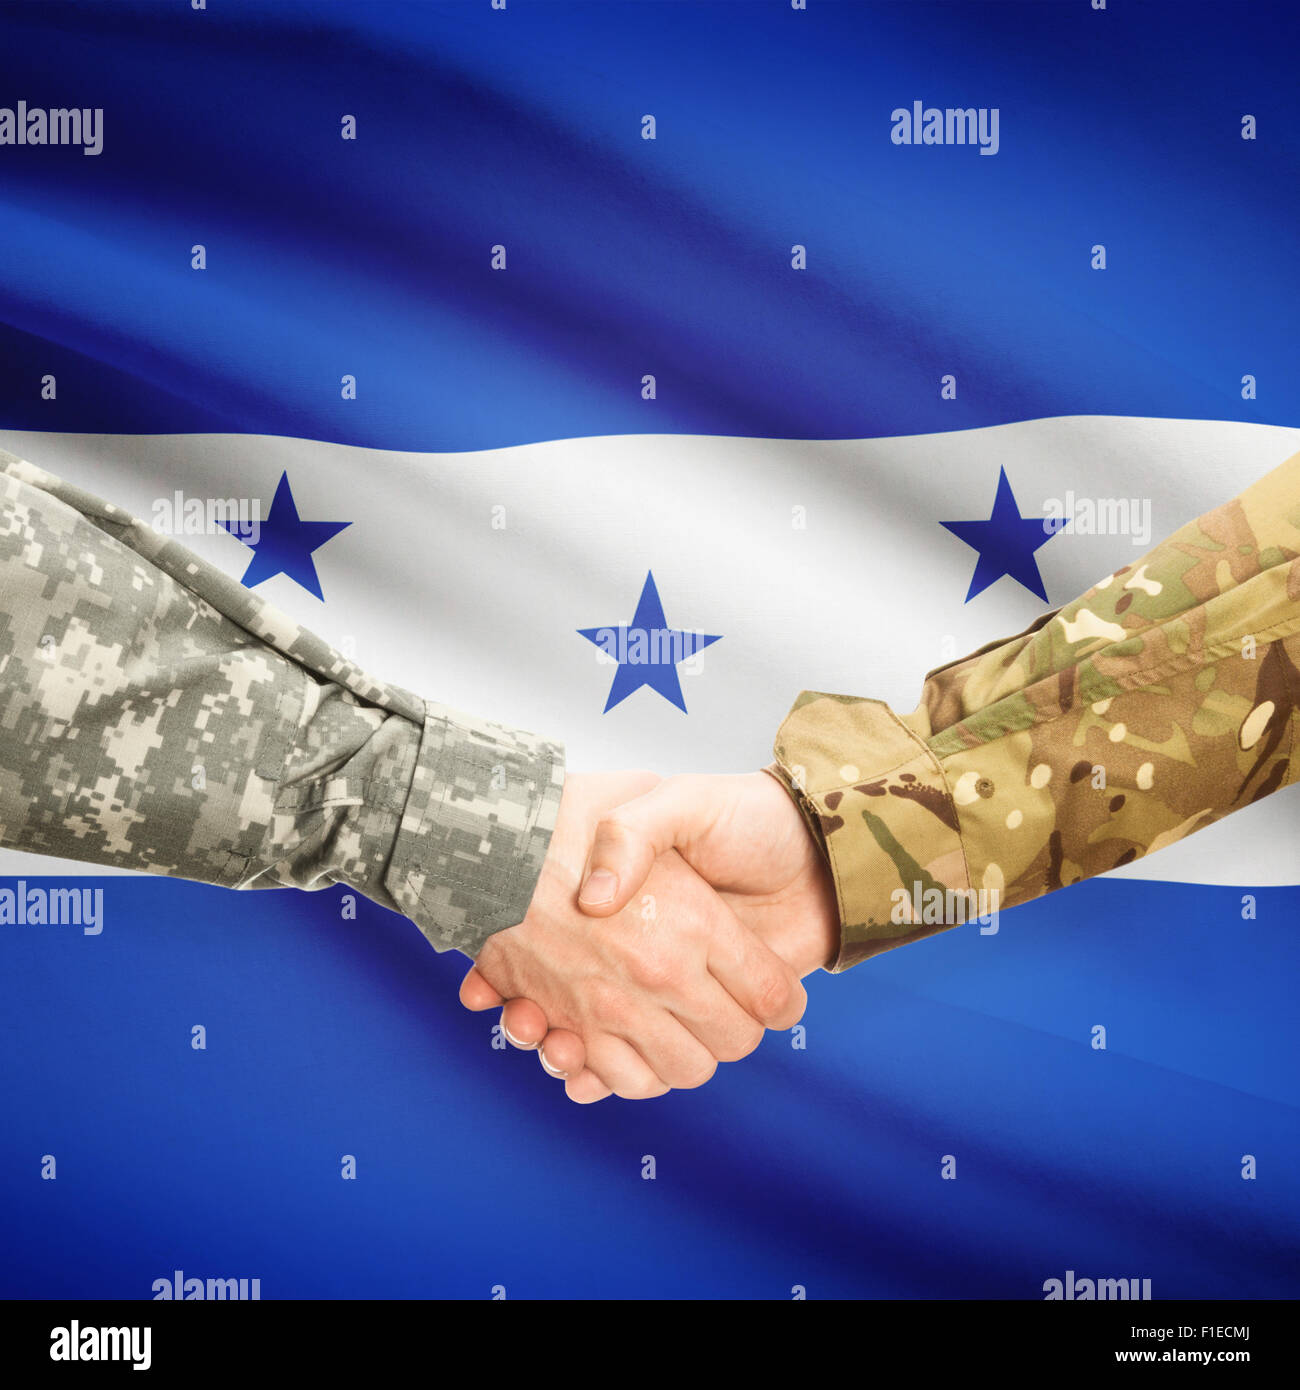 Soldiers shaking hands with flag on background - Honduras Stock Photo